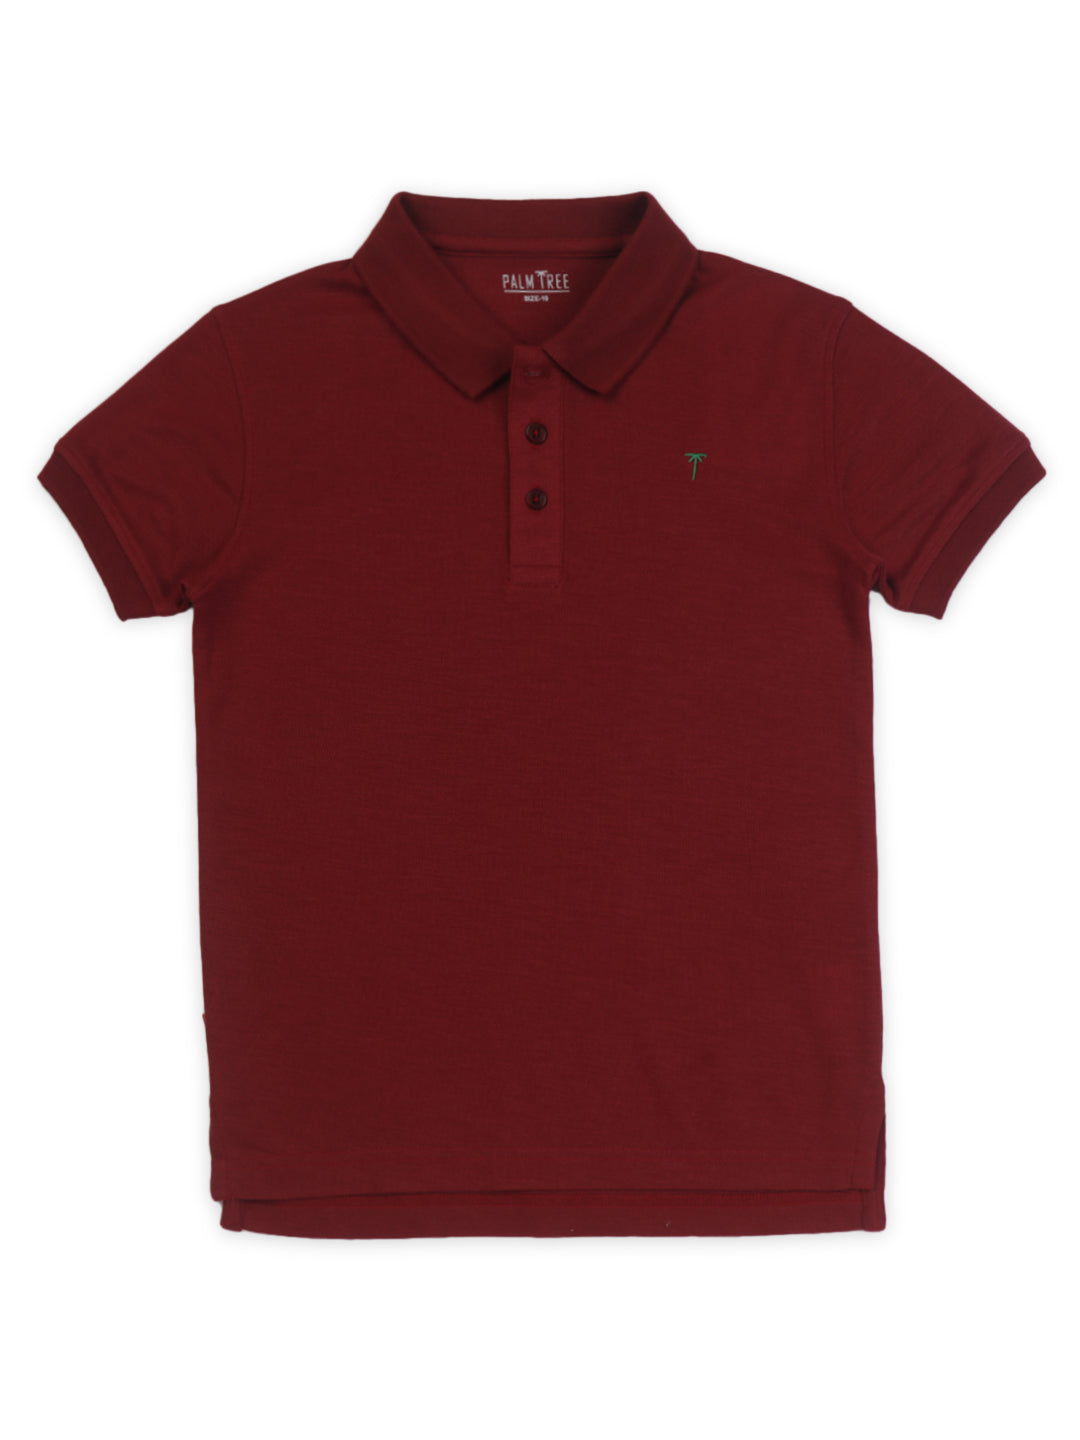 Boys Maroon Solid Cotton Polo T-Shirt